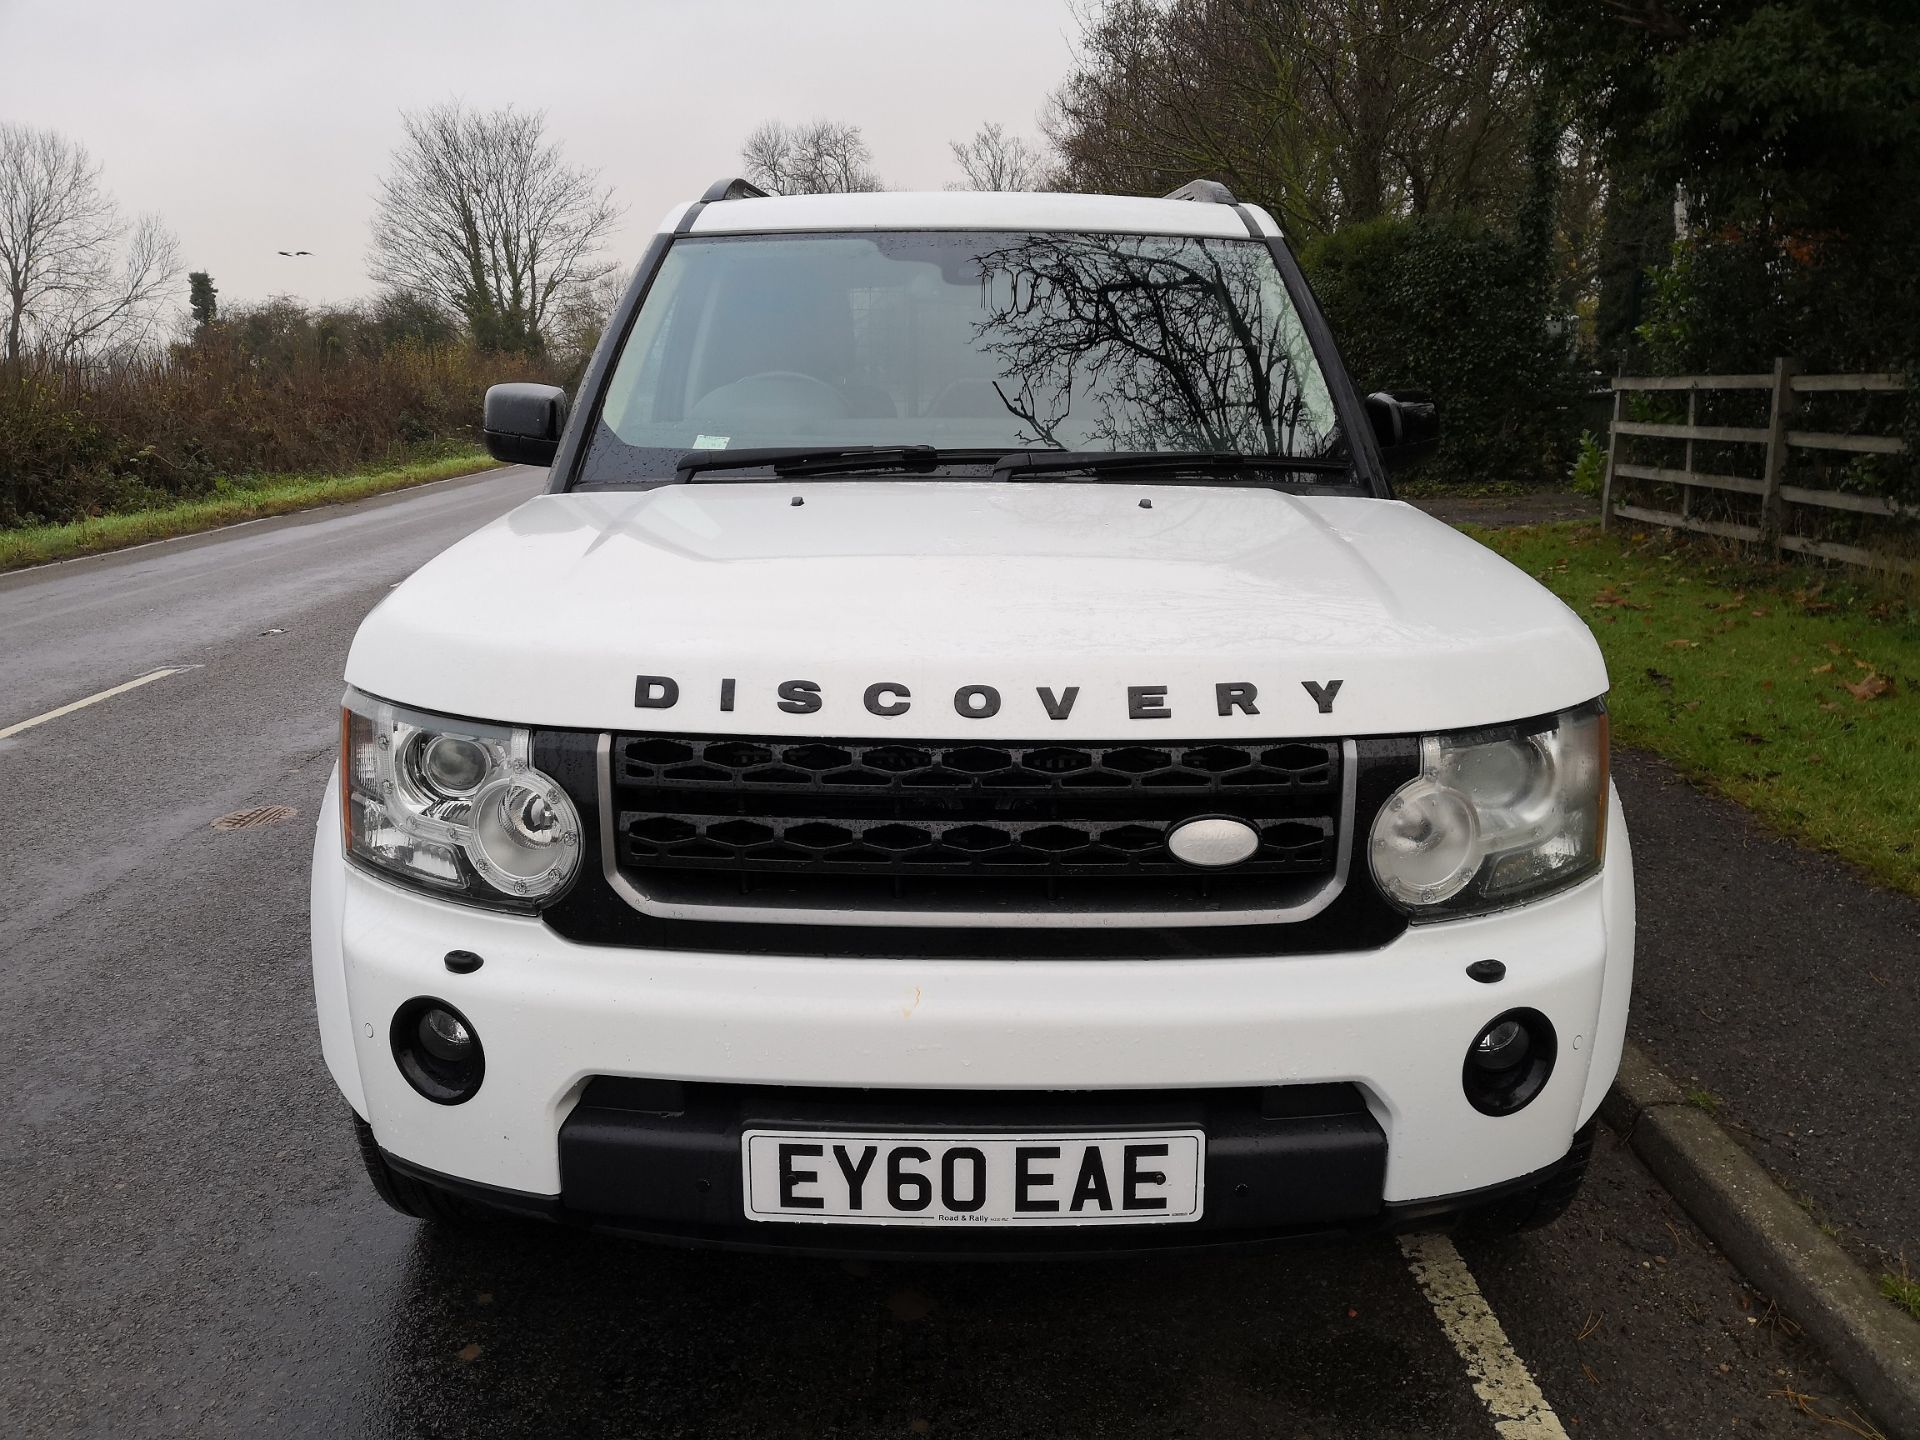 2011/60 REG LAND ROVER DISCOVERY 4 TDV6 AUTOMATIC WHITE COMMERCIAL DIESEL LIGHT 4X4 *NO VAT* - Image 2 of 19